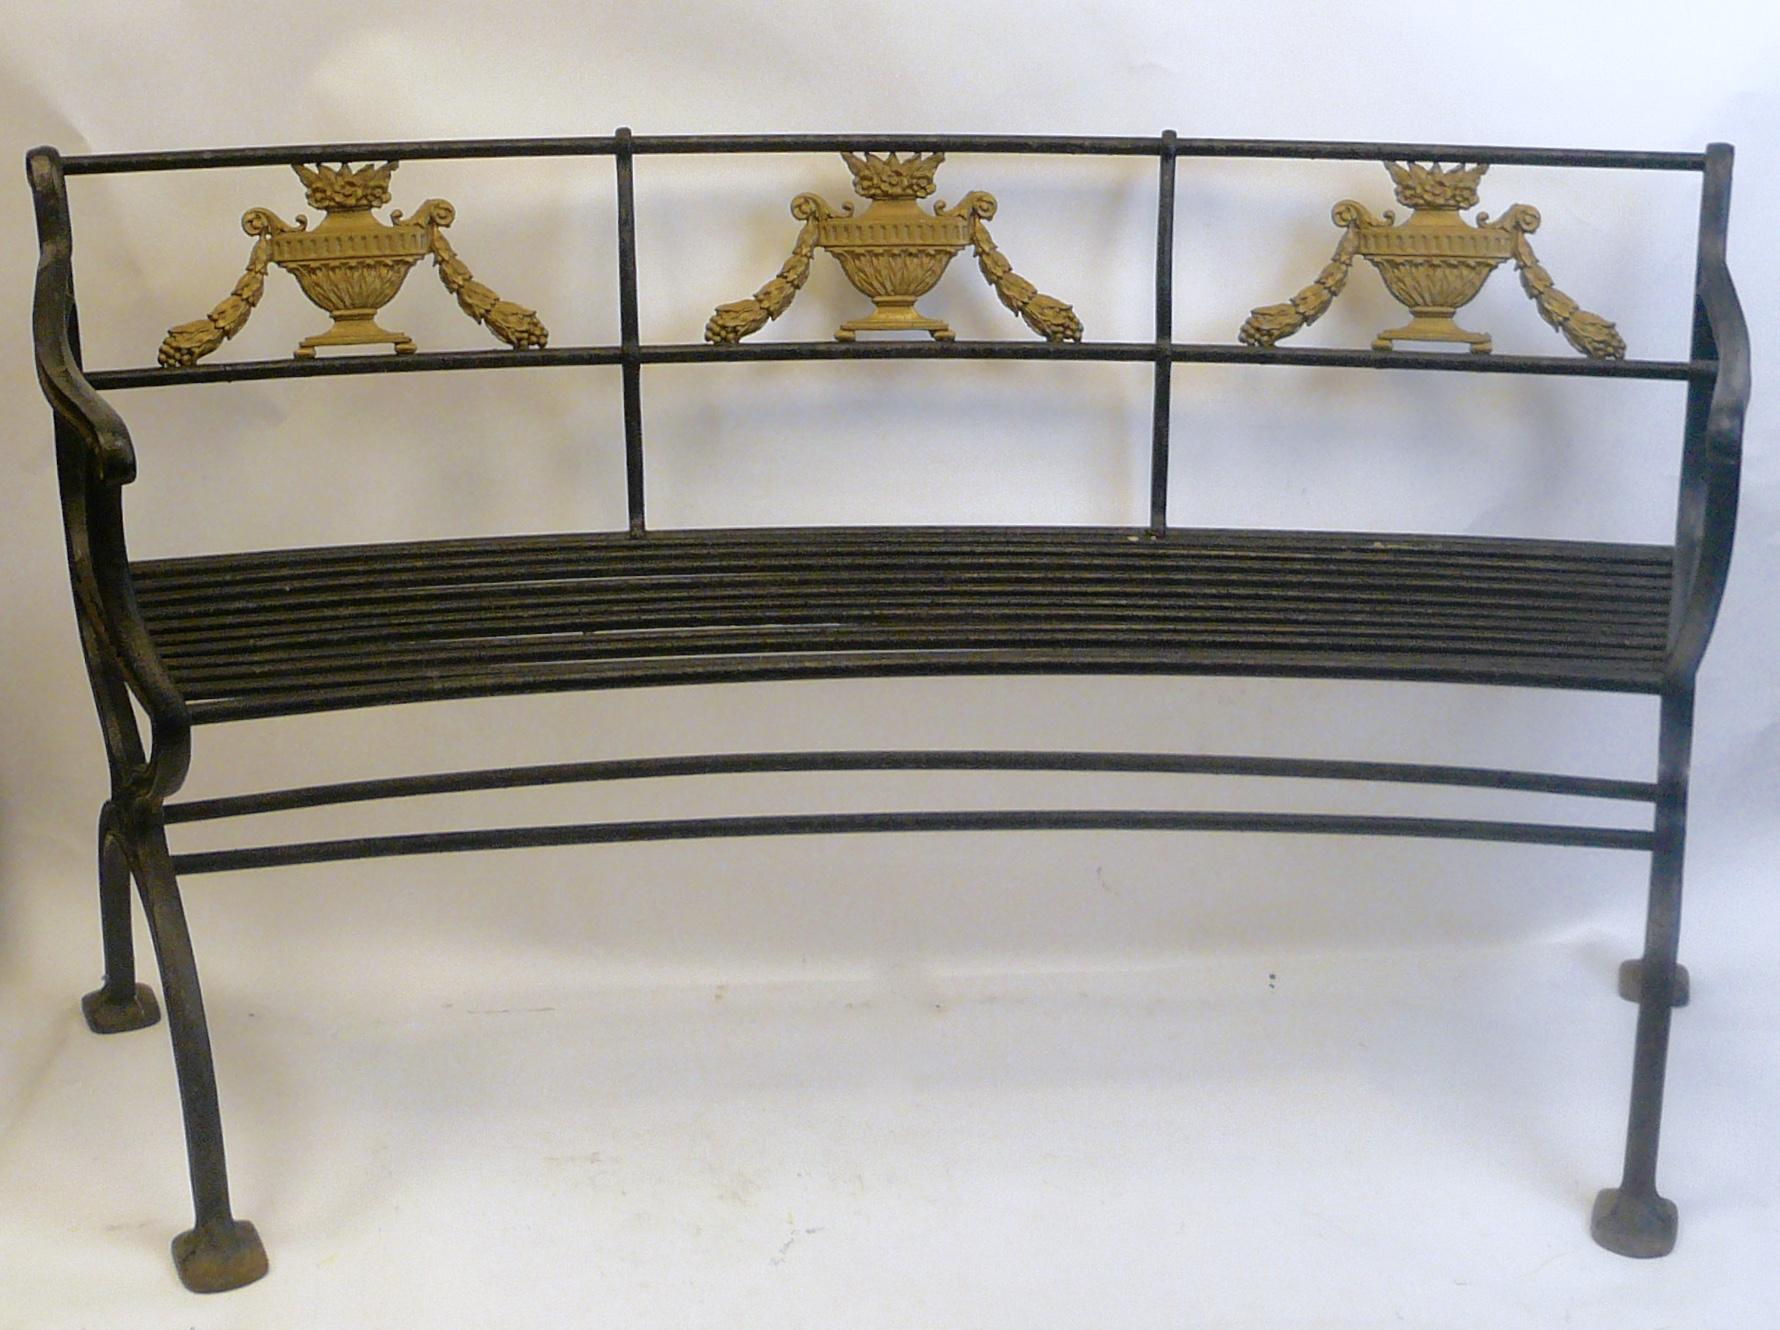 Regency Pair of Classical Style Cast Iron Garden Benches by W. A. Snow, Boston